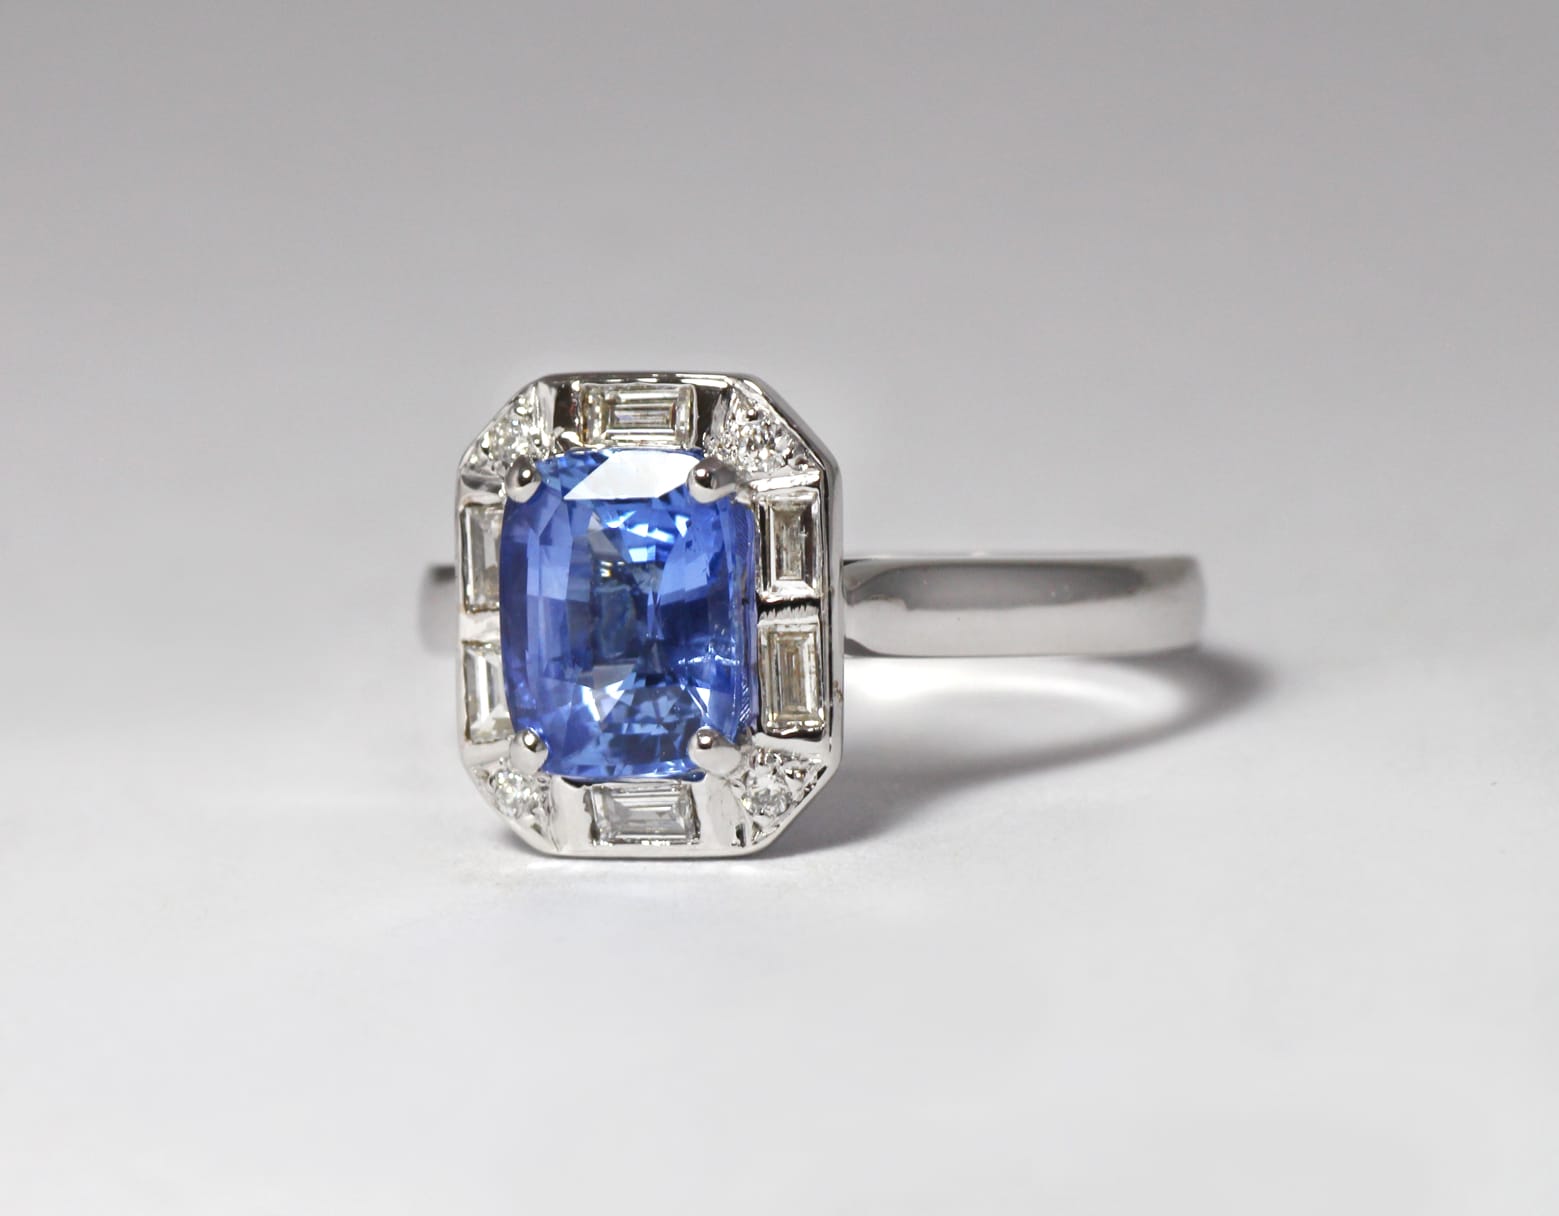 18ct Fairtrade white gold with sapphire and diamonds by Zoe Pook Jewellery